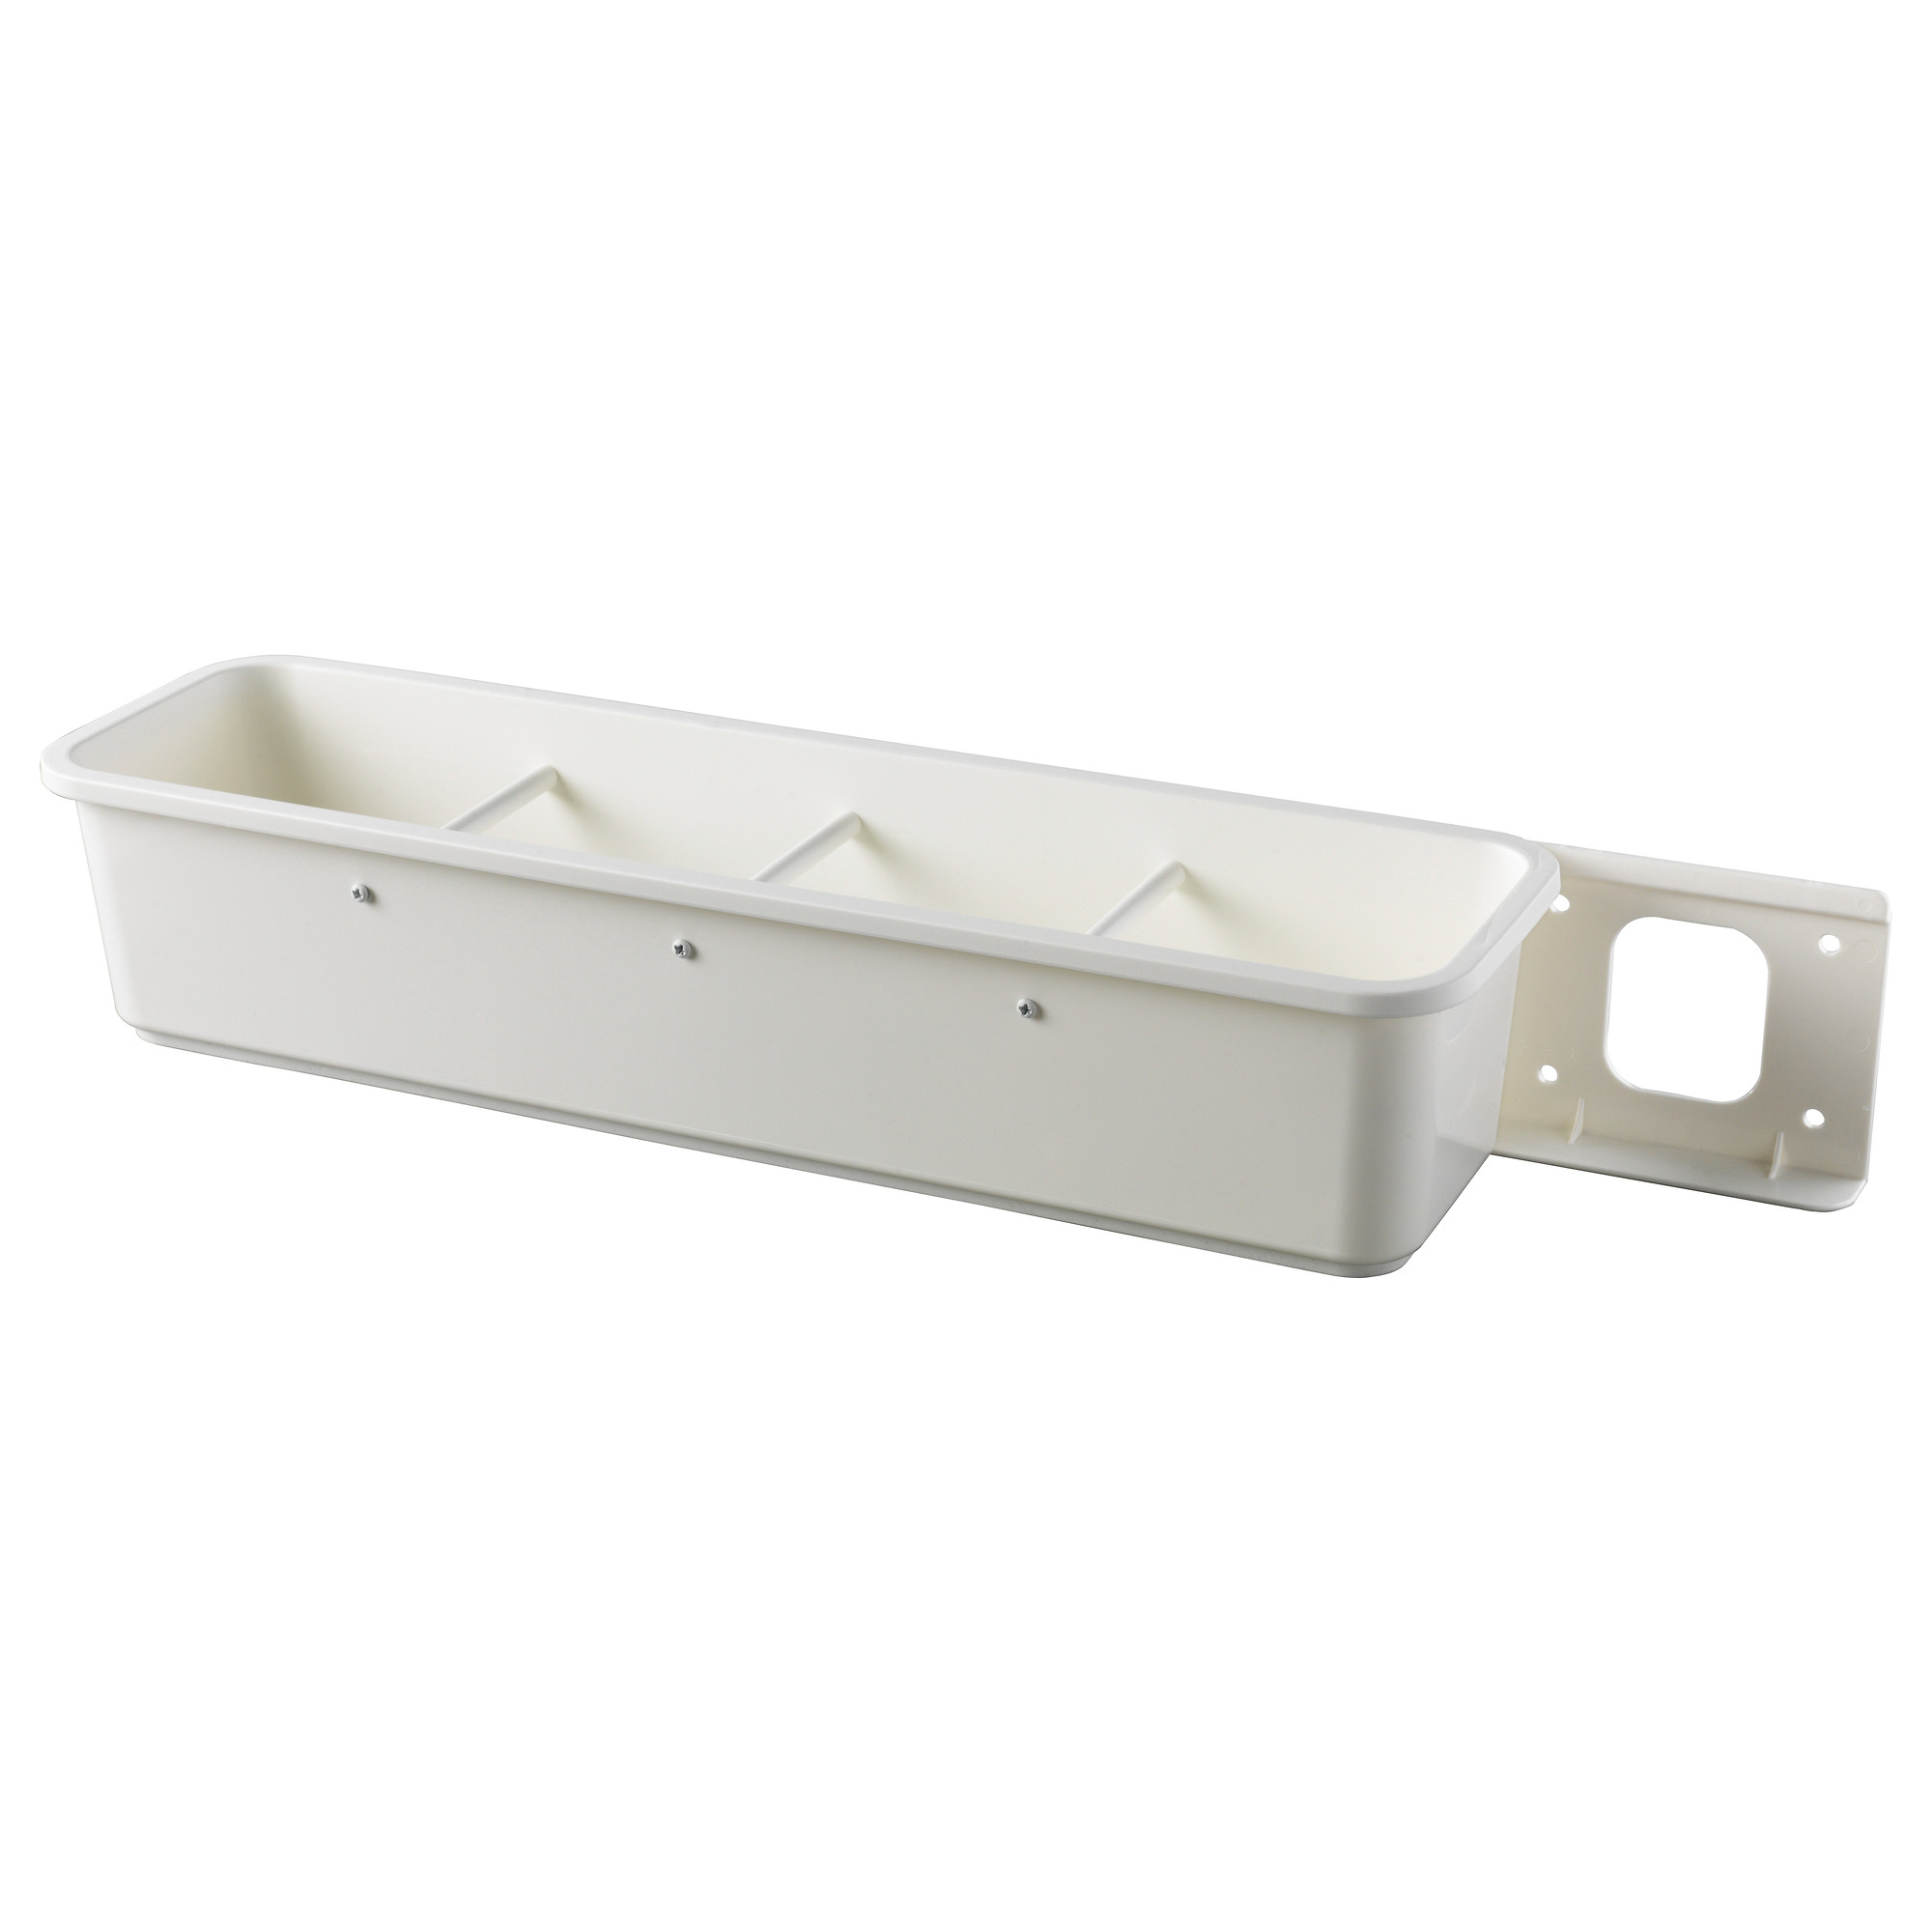 VARIERA pull-out container